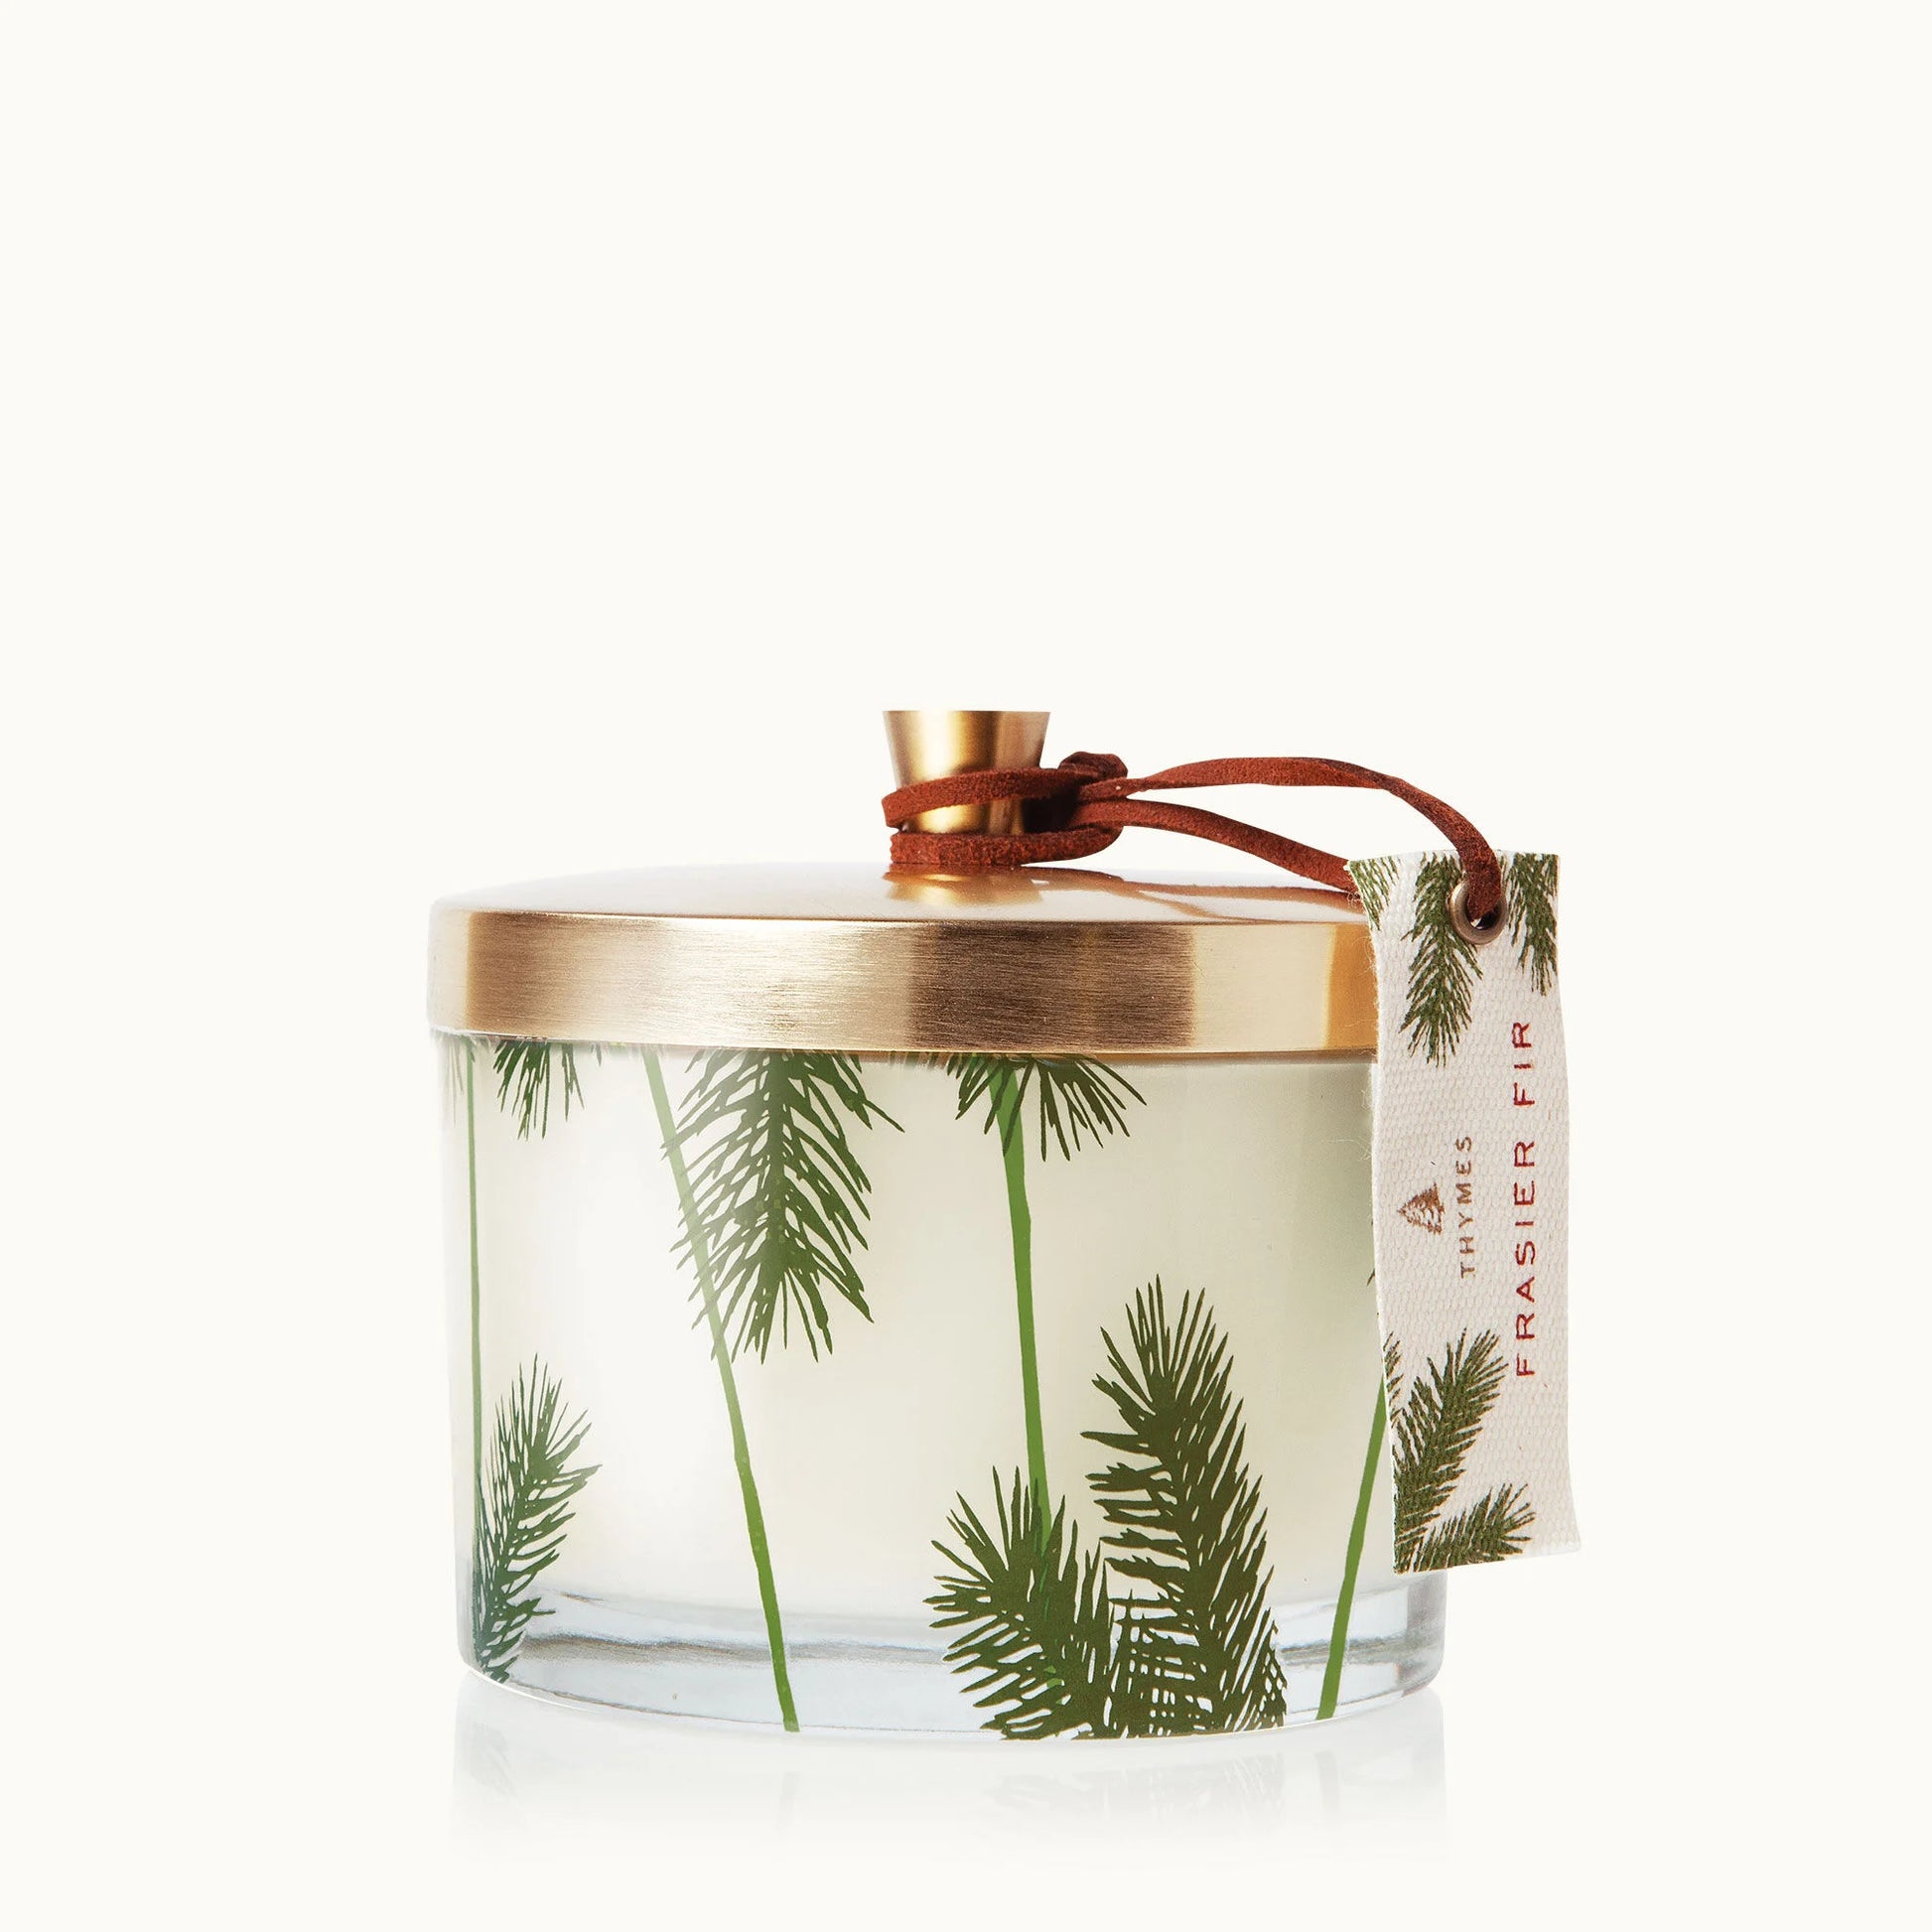 Thymes Frasier Fir Pine Needle 3-Wick Candle-Candles-Thymes-The Village Shoppe, Women’s Fashion Boutique, Shop Online and In Store - Located in Muscle Shoals, AL.